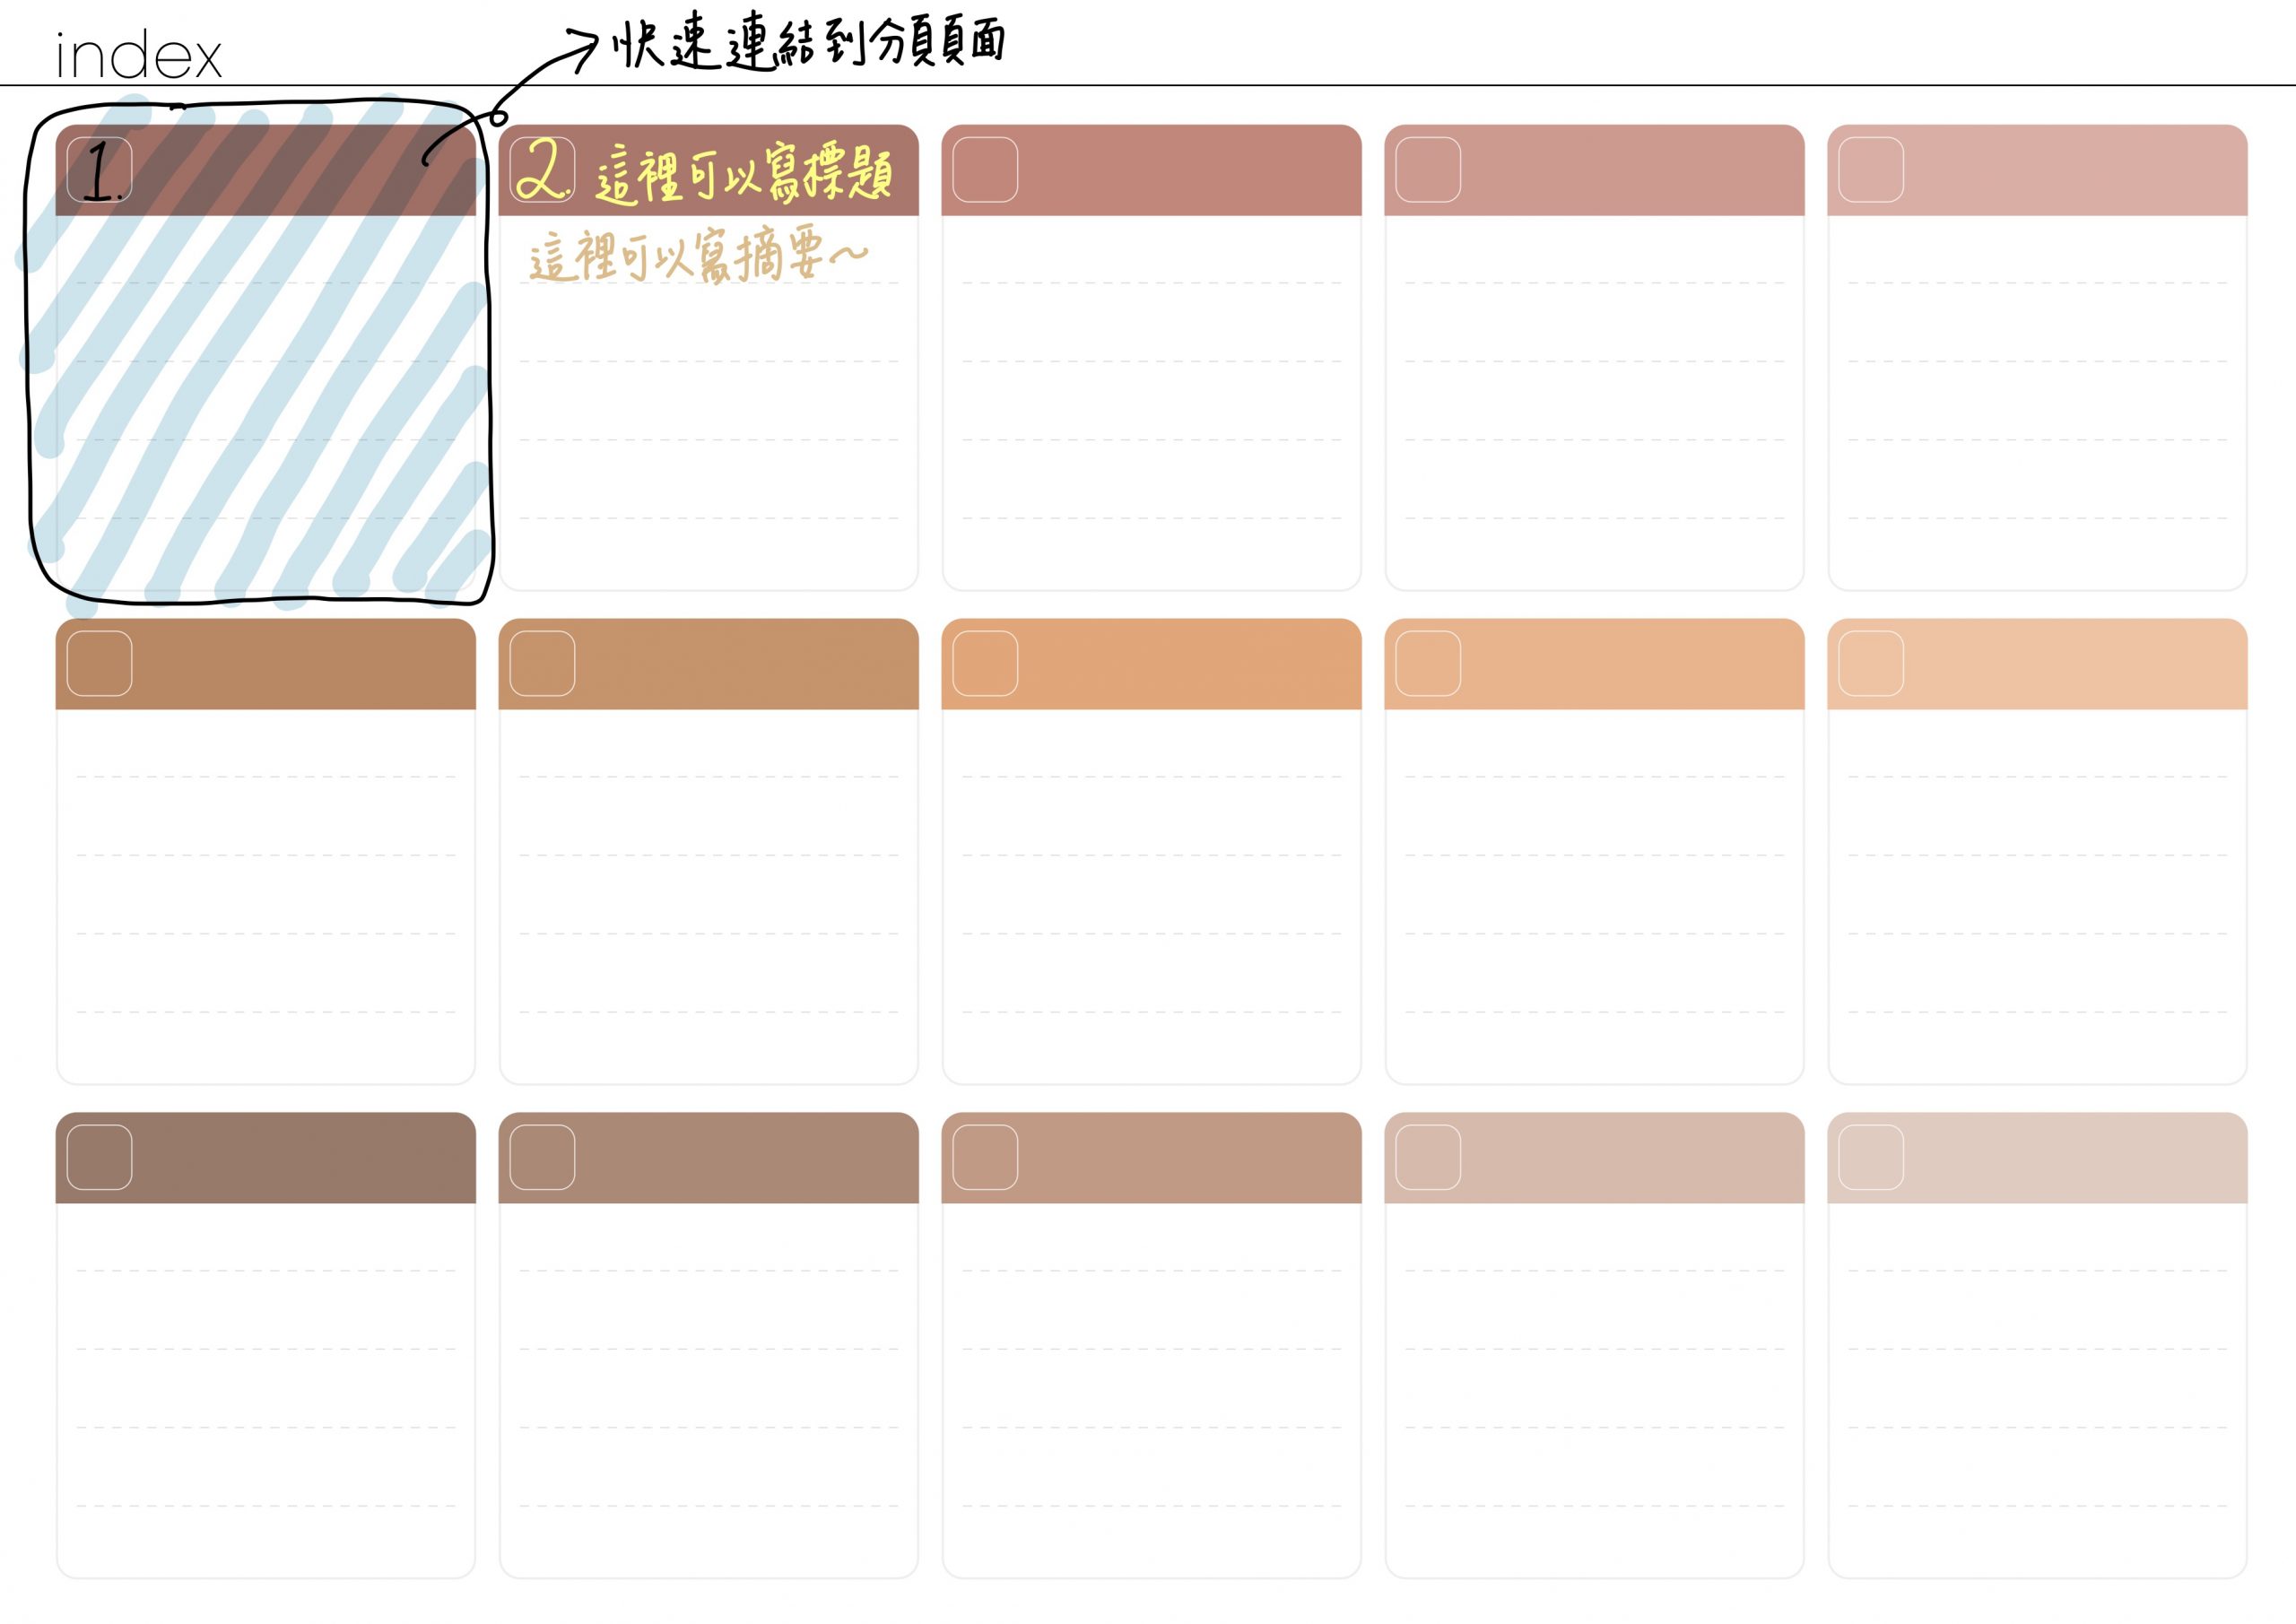 Notebook-Landscape-Solid Color Cover-15 Tabs-Bubble Tea Time-White Mode 索引手寫說明 | me.Learning